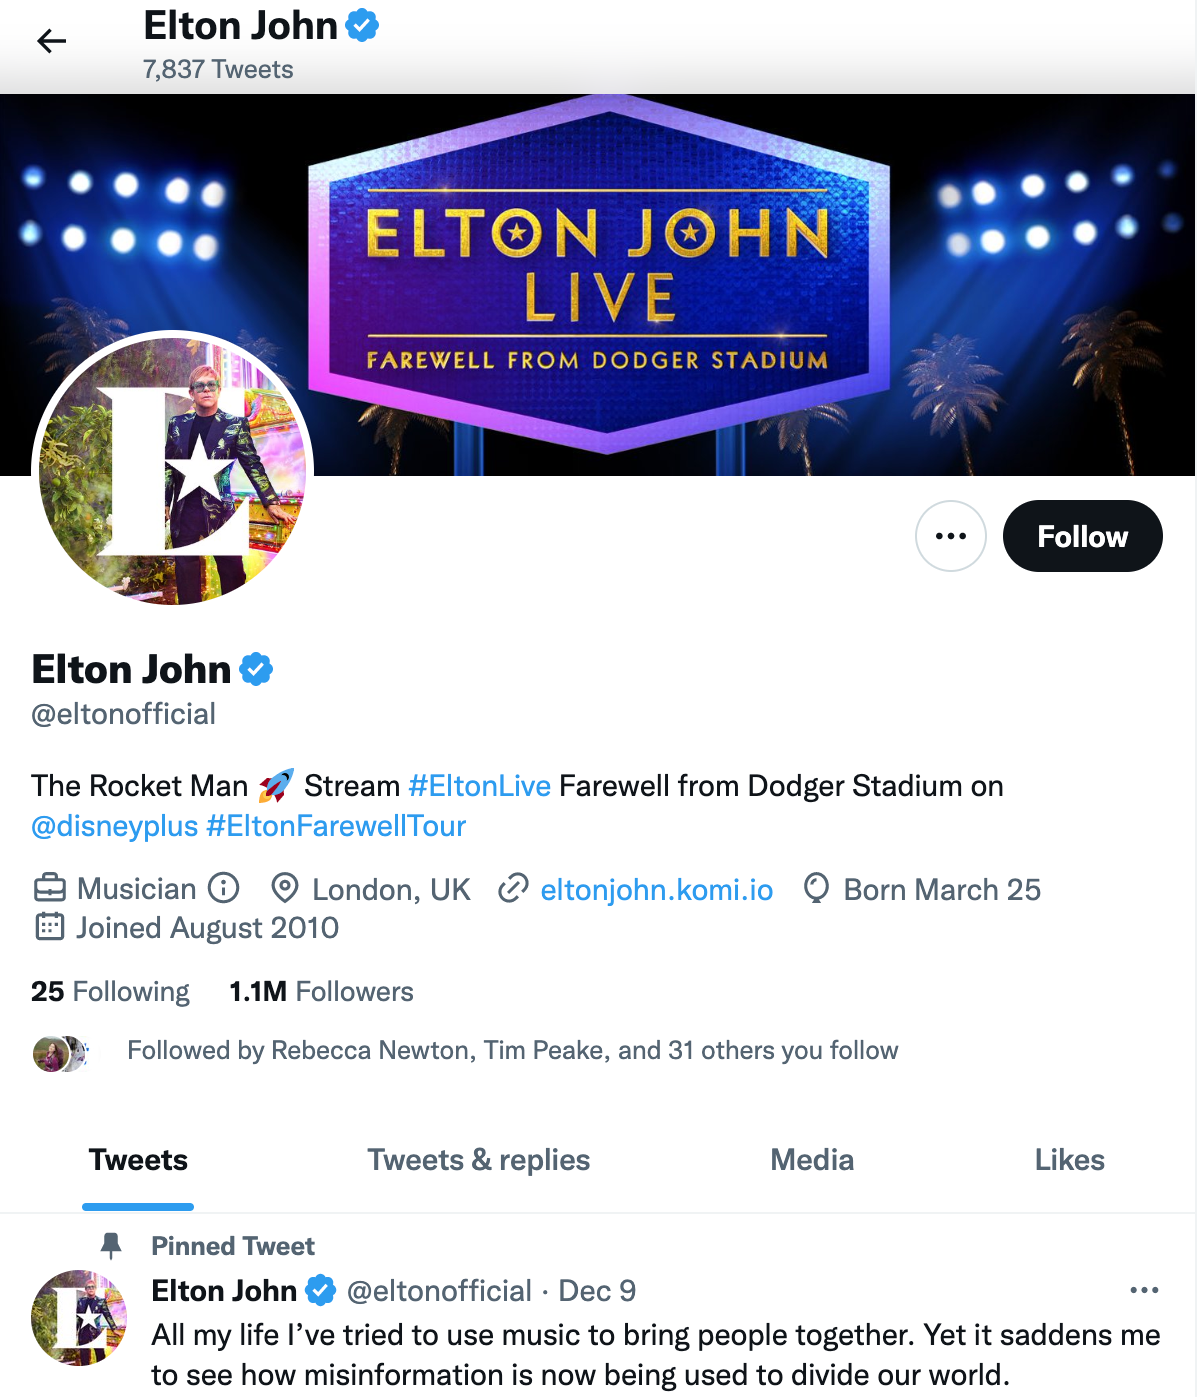 Tech Digest day-to-day roundup: Elton John quits Twitter over incorrect information coverage